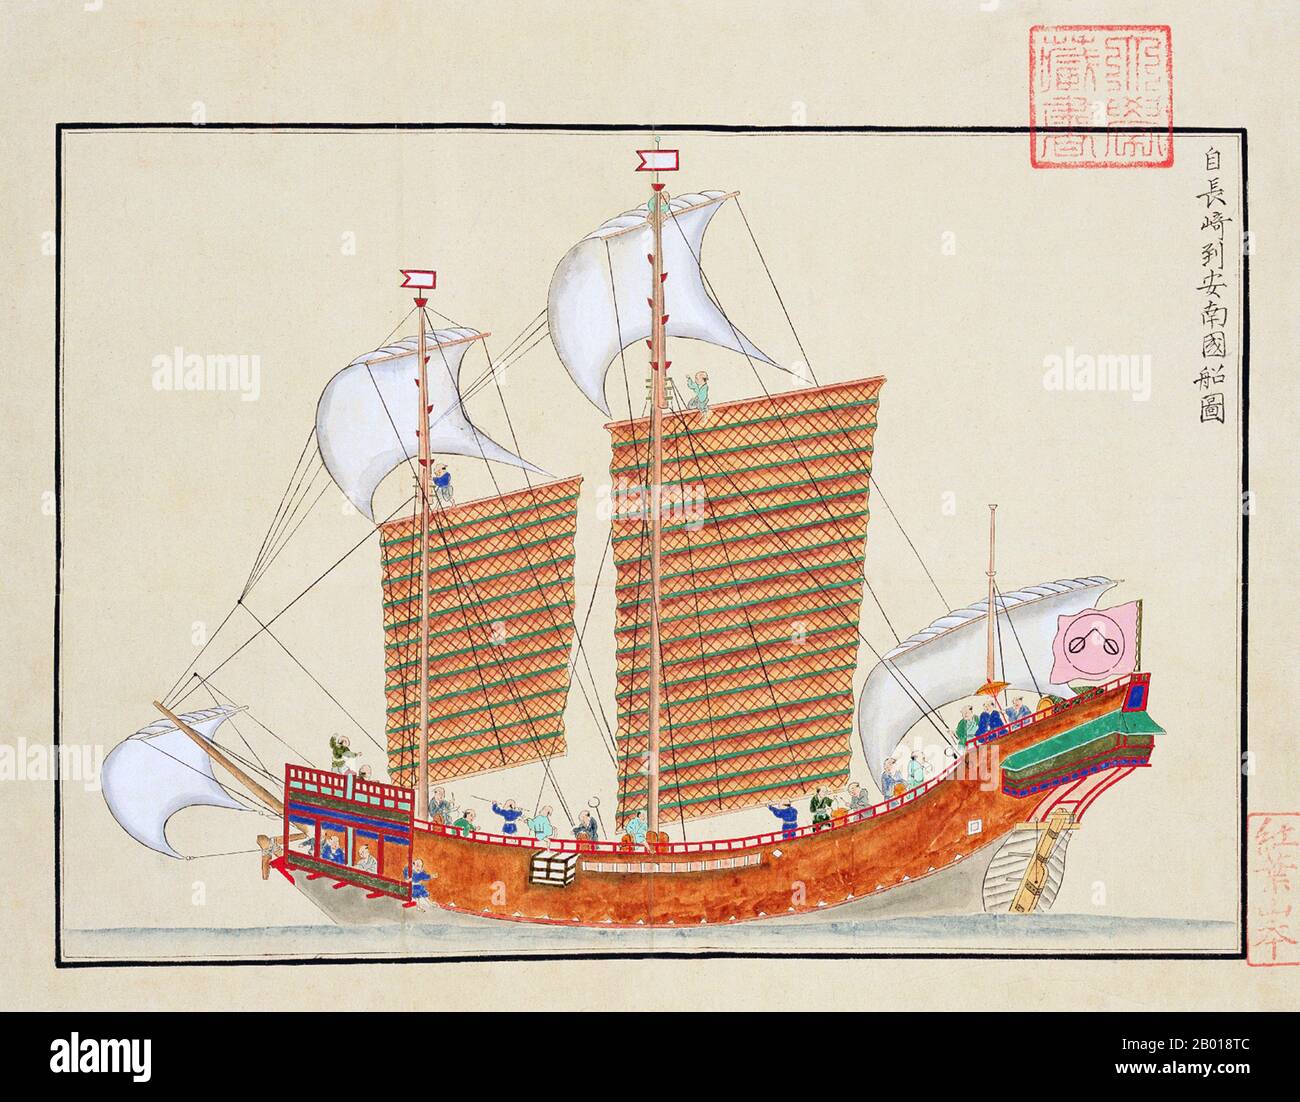 Japan: A 17th century Red Seal ship of the Araki trading family, trading out of Nagasaki to Annam (Vietnam). Painting from the 'Gaiban Shokan', compiled by Kondo Seisai (1771-1829), c. 1790.  The 'Gaiban Shokan' was prepared as a reference work for 'Gaiban Tsusho', the compilation of diplomatic documents of the Tokugawa shogunate, prepared by Kondo Seisai, who served as the magistrate of Nagasaki and the magistrate of books and records. It contains copies of diplomatic papers, including 33 certificates impressed with the shogun's vermillion seal for officially authorised overseas trips. Stock Photo